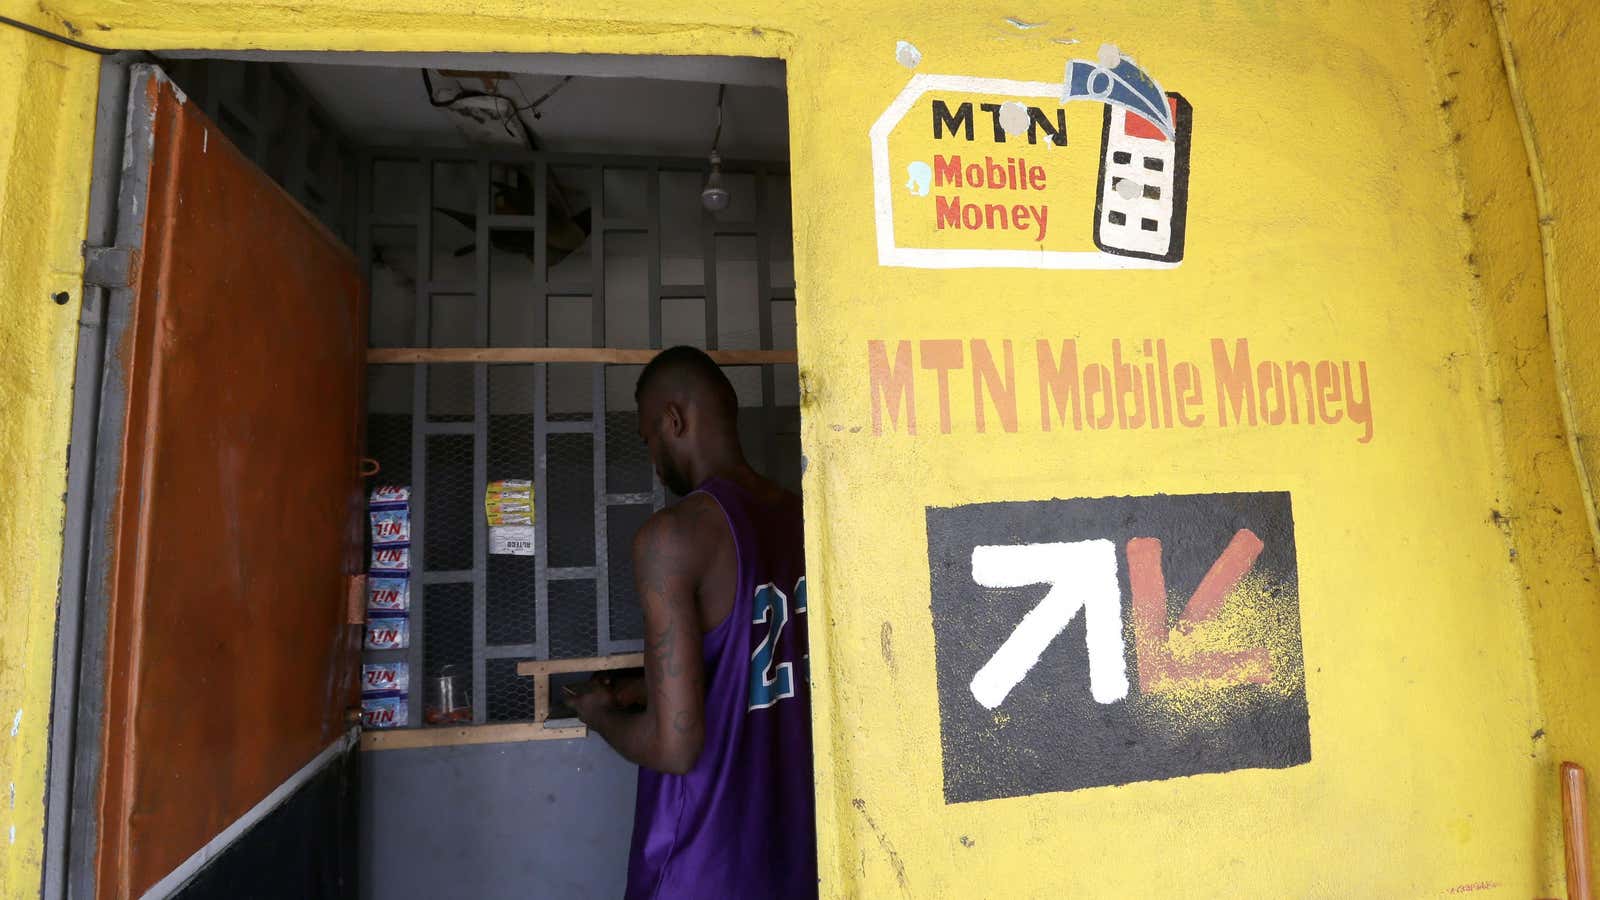 MTN, has signed a partnership deal with Flutterwave that will enable businesses in Cameroon, Côte d’Ivoire, Rwanda, Uganda and Zambia to make cash transfers via MTN Mobile Money (MoMo).